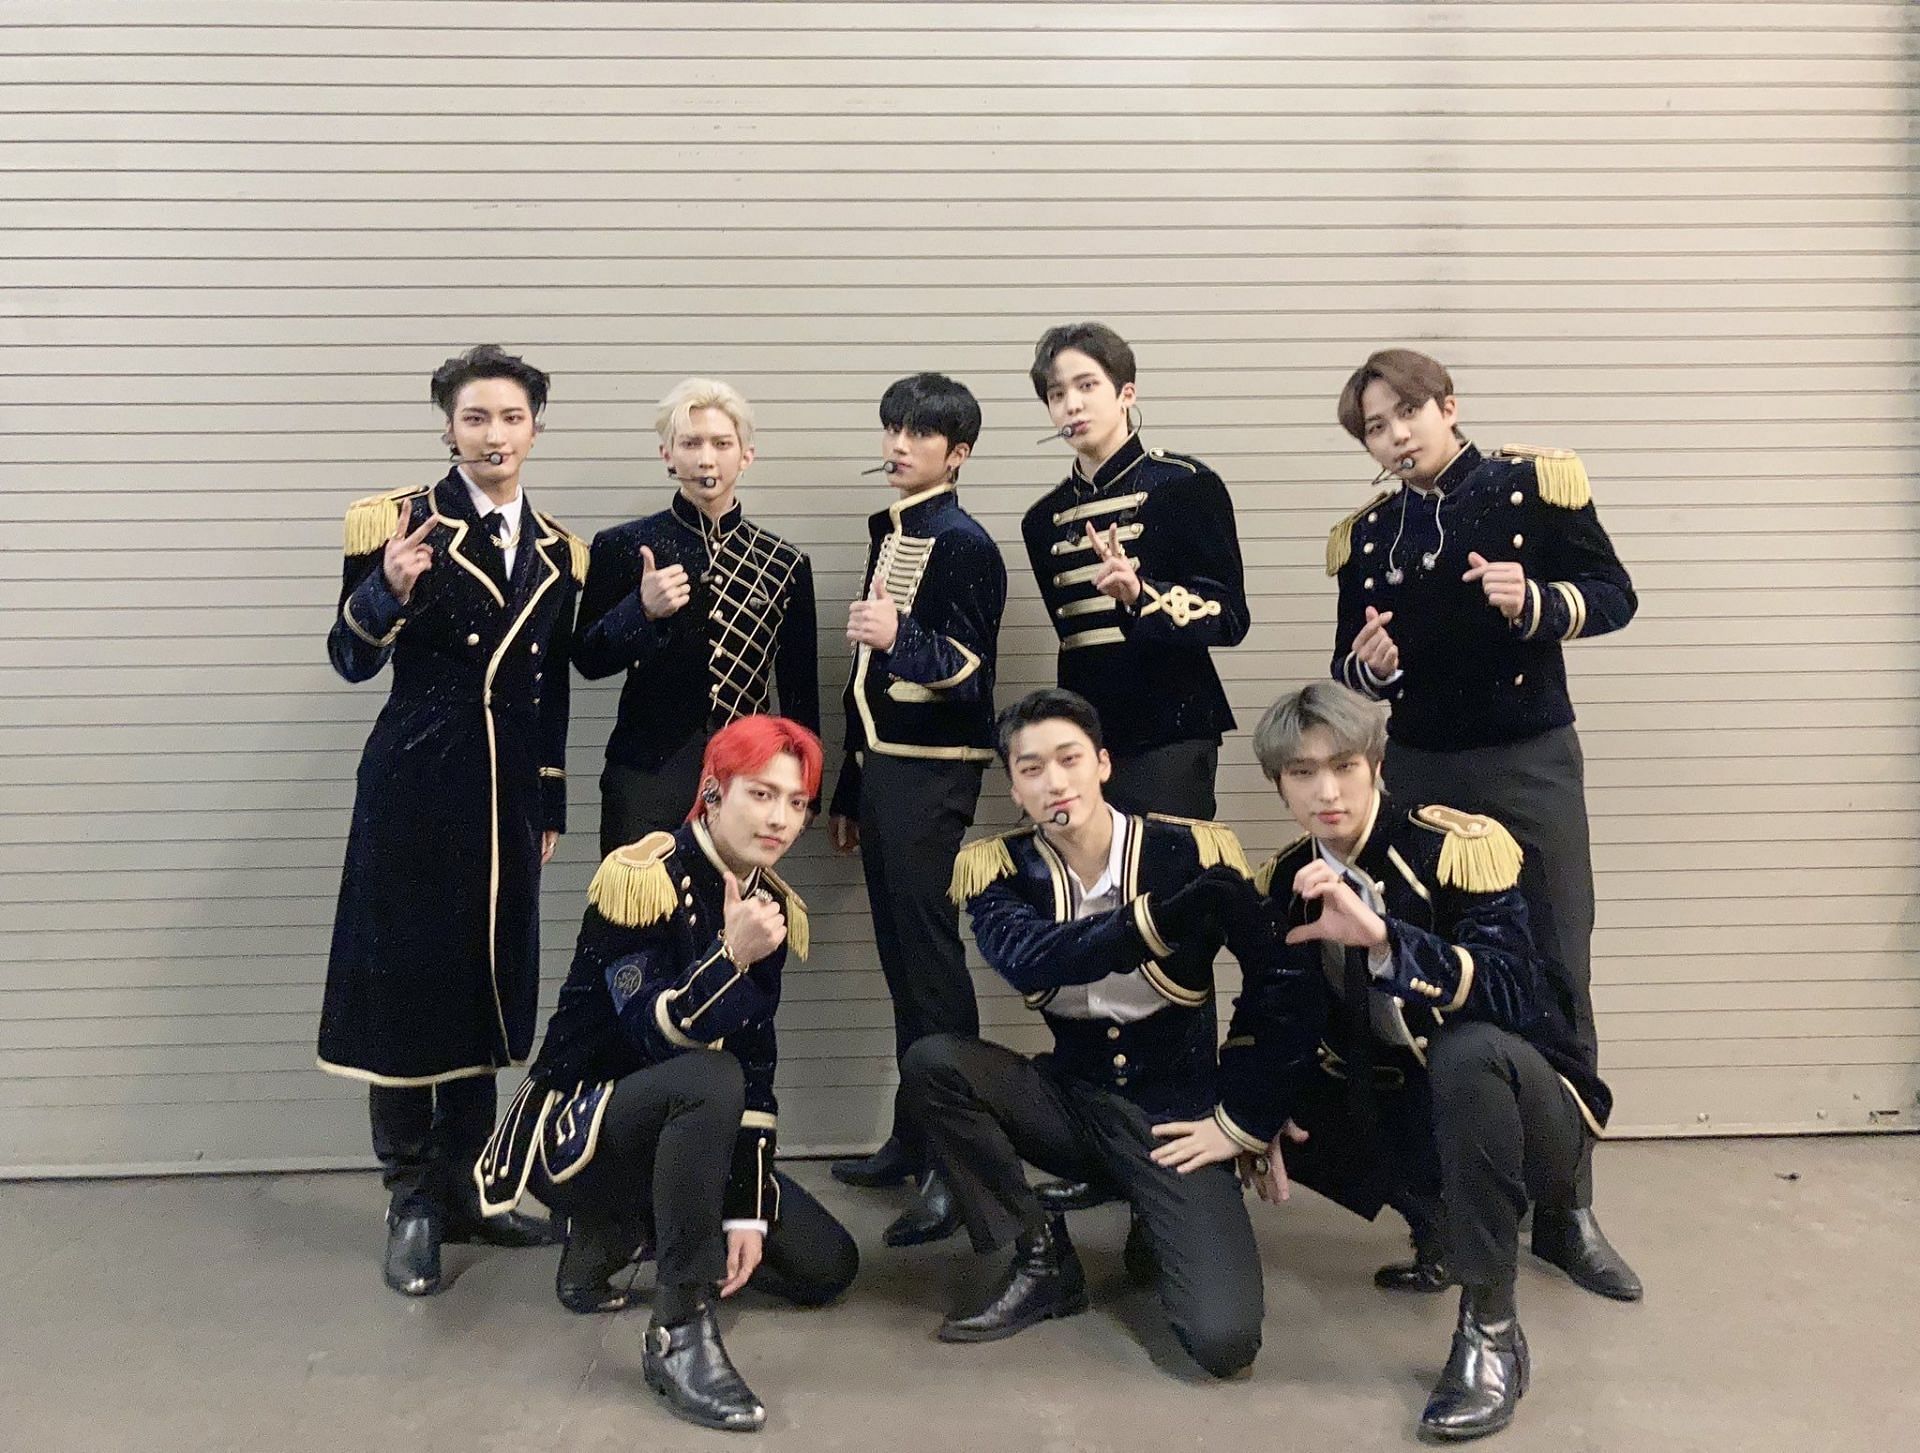 The group is currently on the USA leg of the world tour (Image via Twitter/@ATEEZofficial)